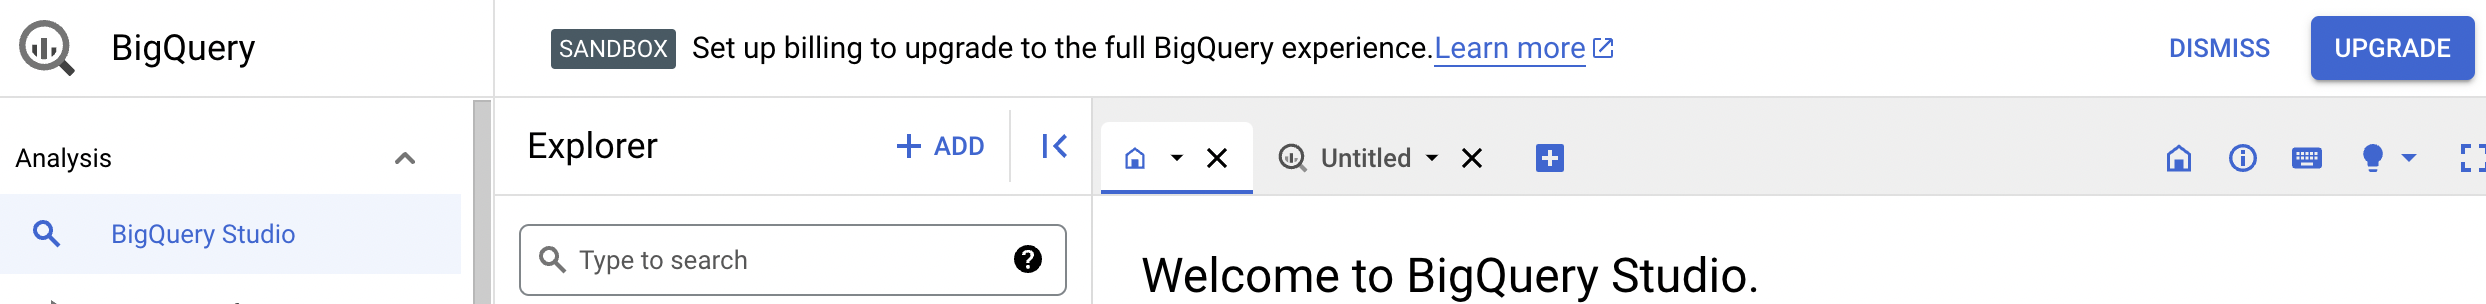 The confirmation notice provides the option to upgrade to the full BigQuery experience.